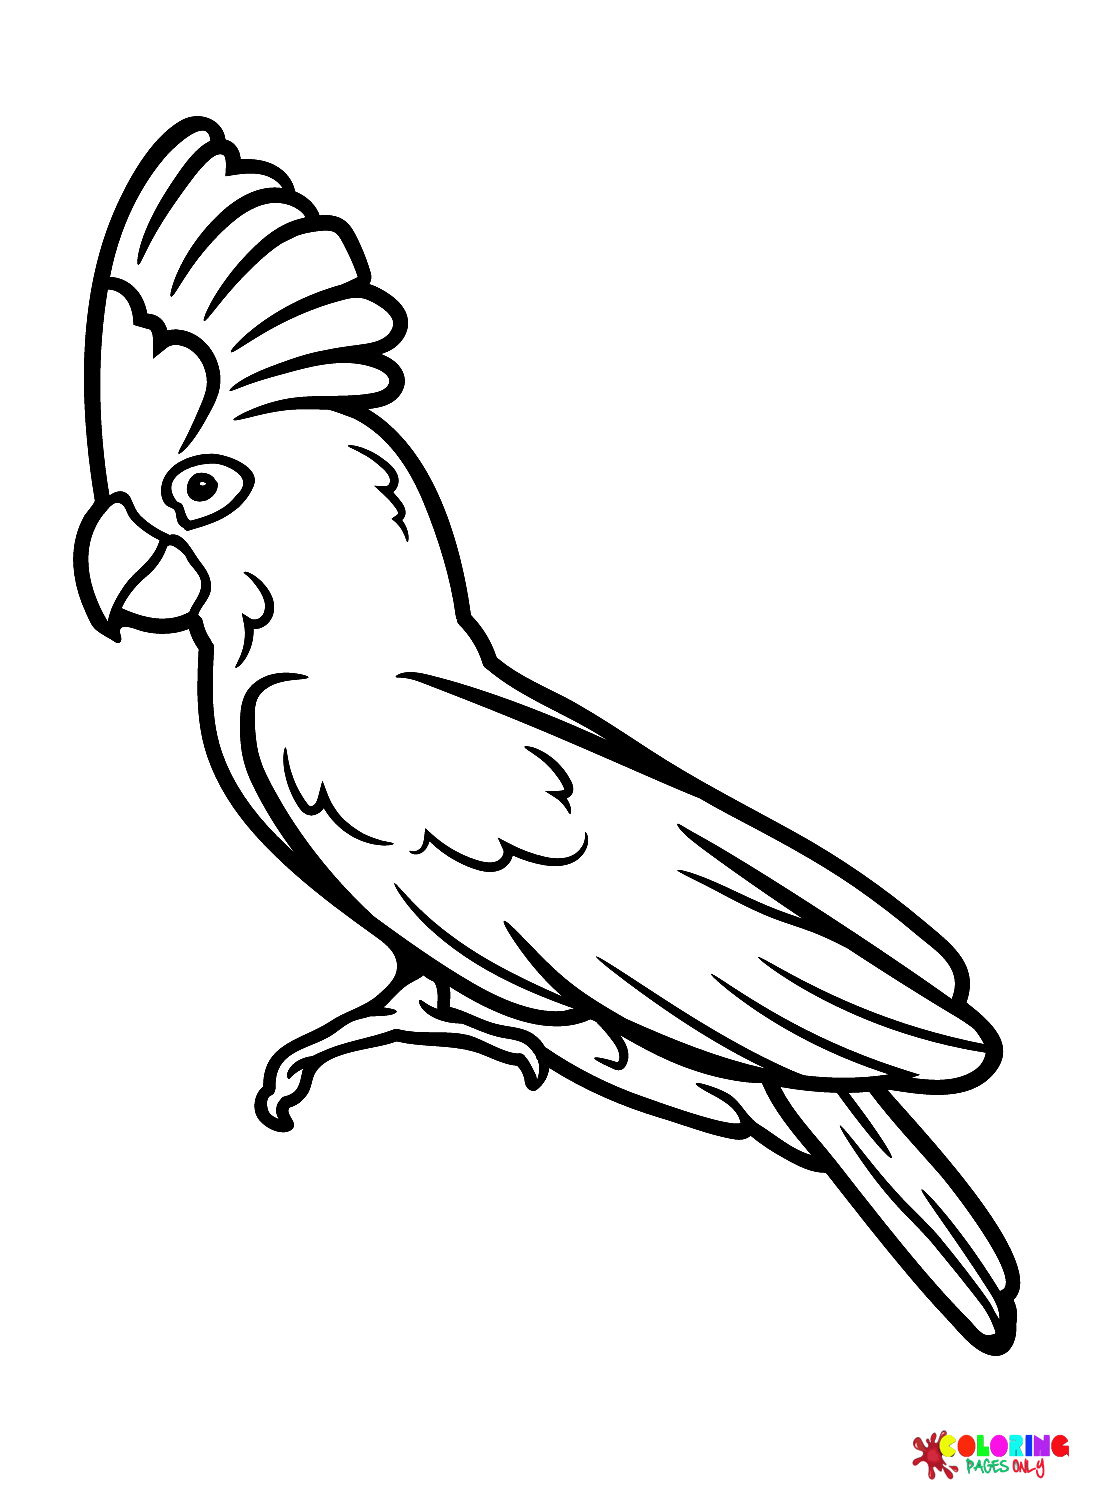 Cockatoo Images Coloring Pages